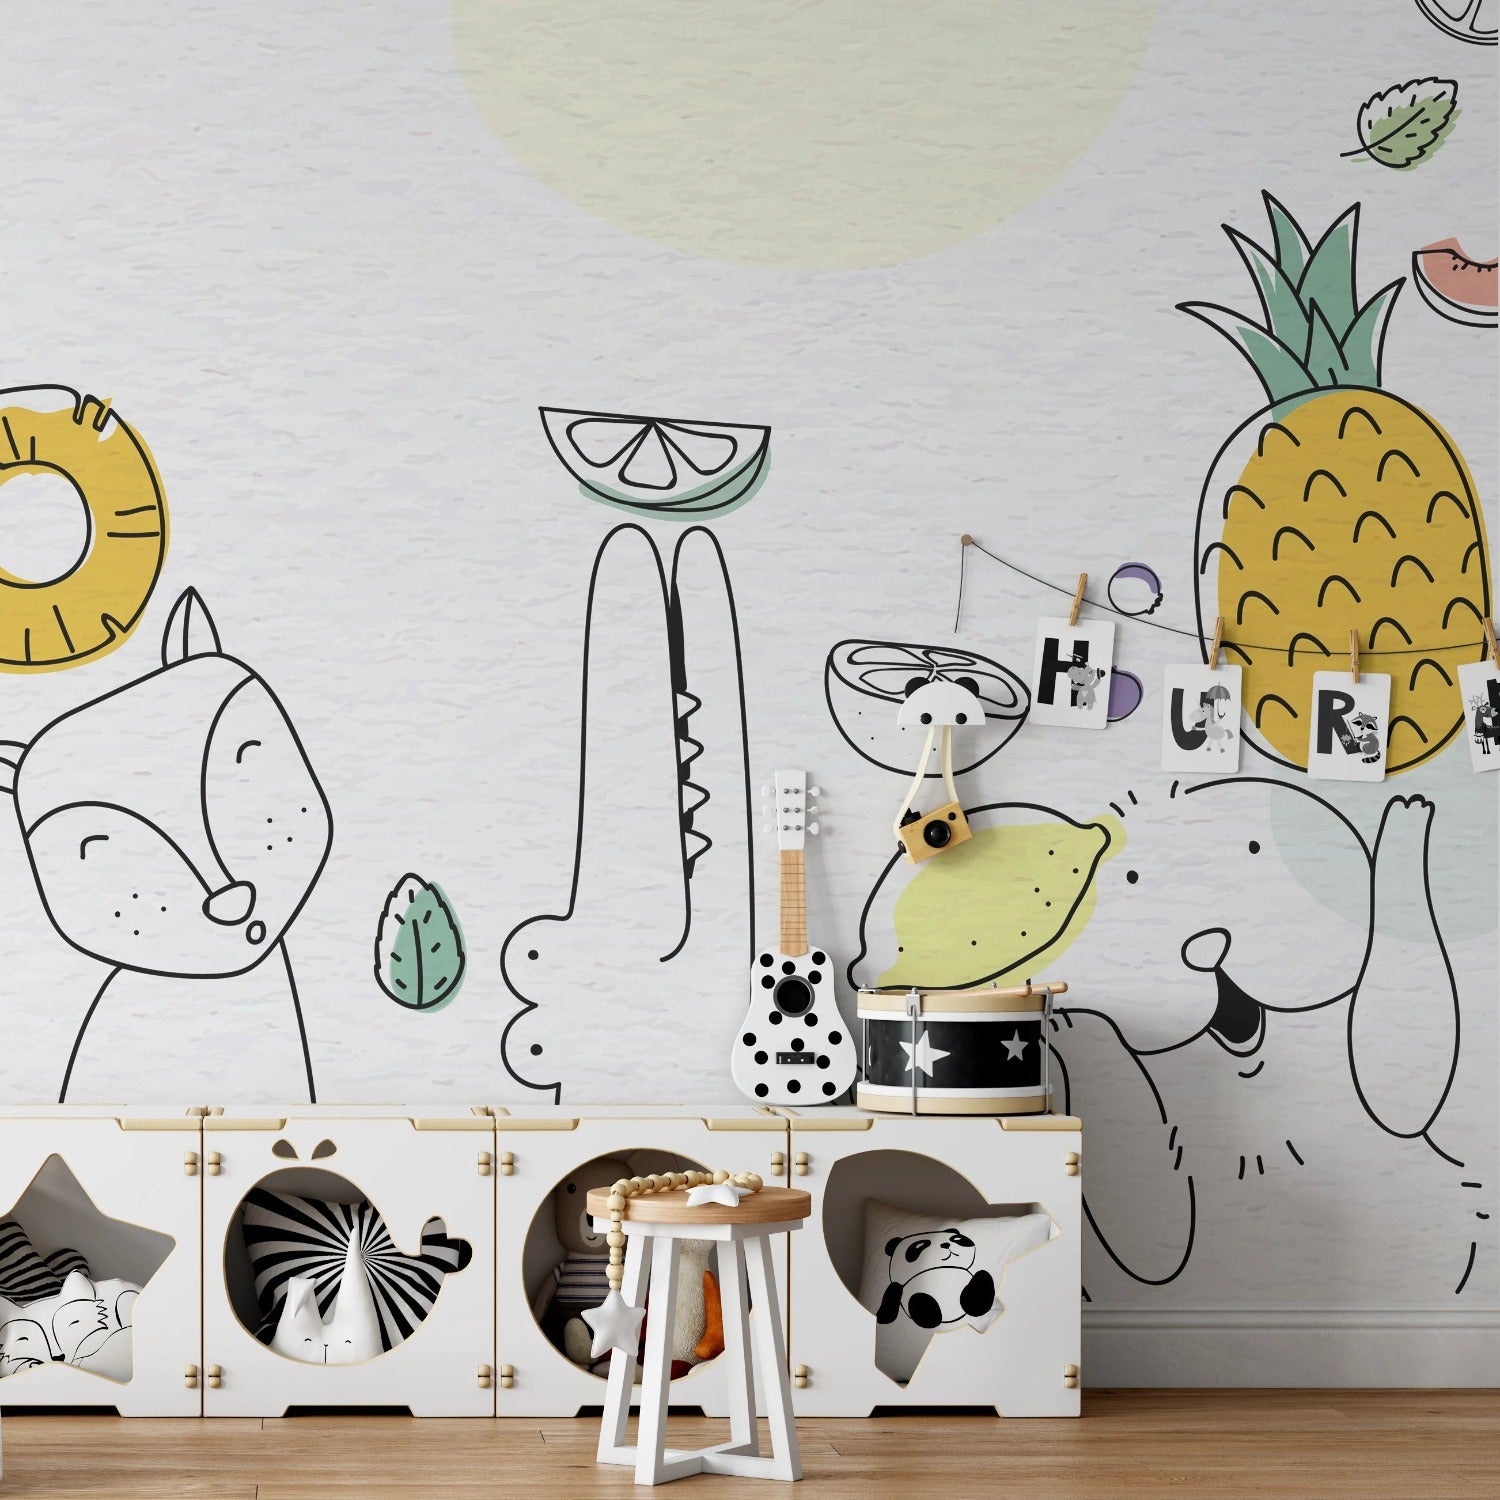 Playful children's room wallpaper featuring whimsical line drawings of various animals and fruits, such as a flamingo, fox, and pineapple, in soft pastel and neutral tones. The illustrations are simple and childlike, with decorative elements like leaves and musical instruments scattered throughout. The wallpaper is complemented by a child-friendly furniture setup including a small wooden stool, toy storage boxes, and a toy train on the floor.